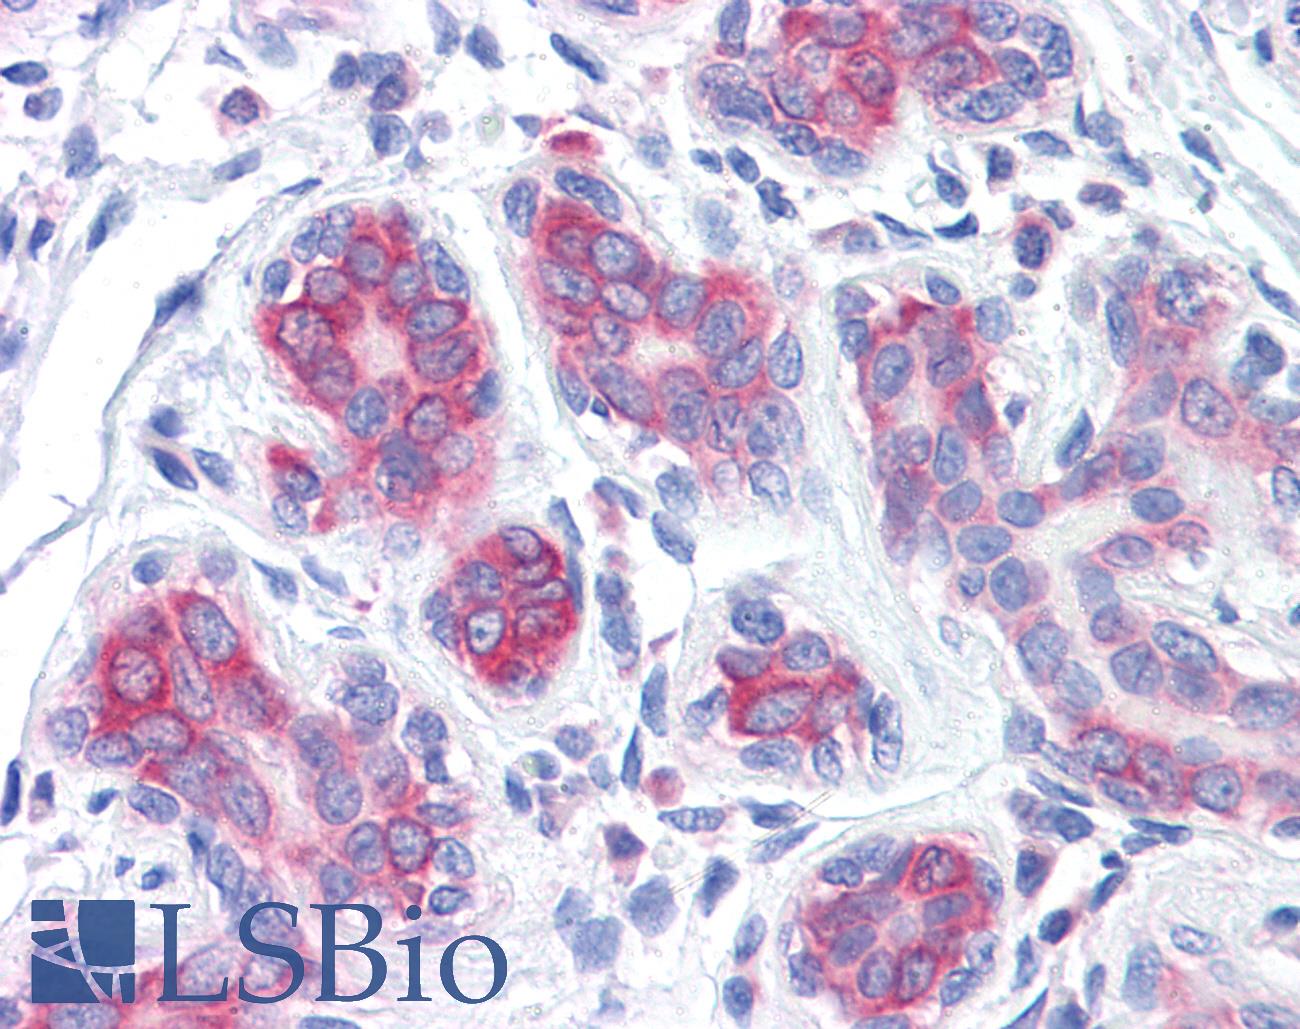 RPS2 / Ribosomal Protein S2 Antibody - Anti-RPS2 antibody IHC of human breast. Immunohistochemistry of formalin-fixed, paraffin-embedded tissue after heat-induced antigen retrieval. Antibody concentration 5 ug/ml.